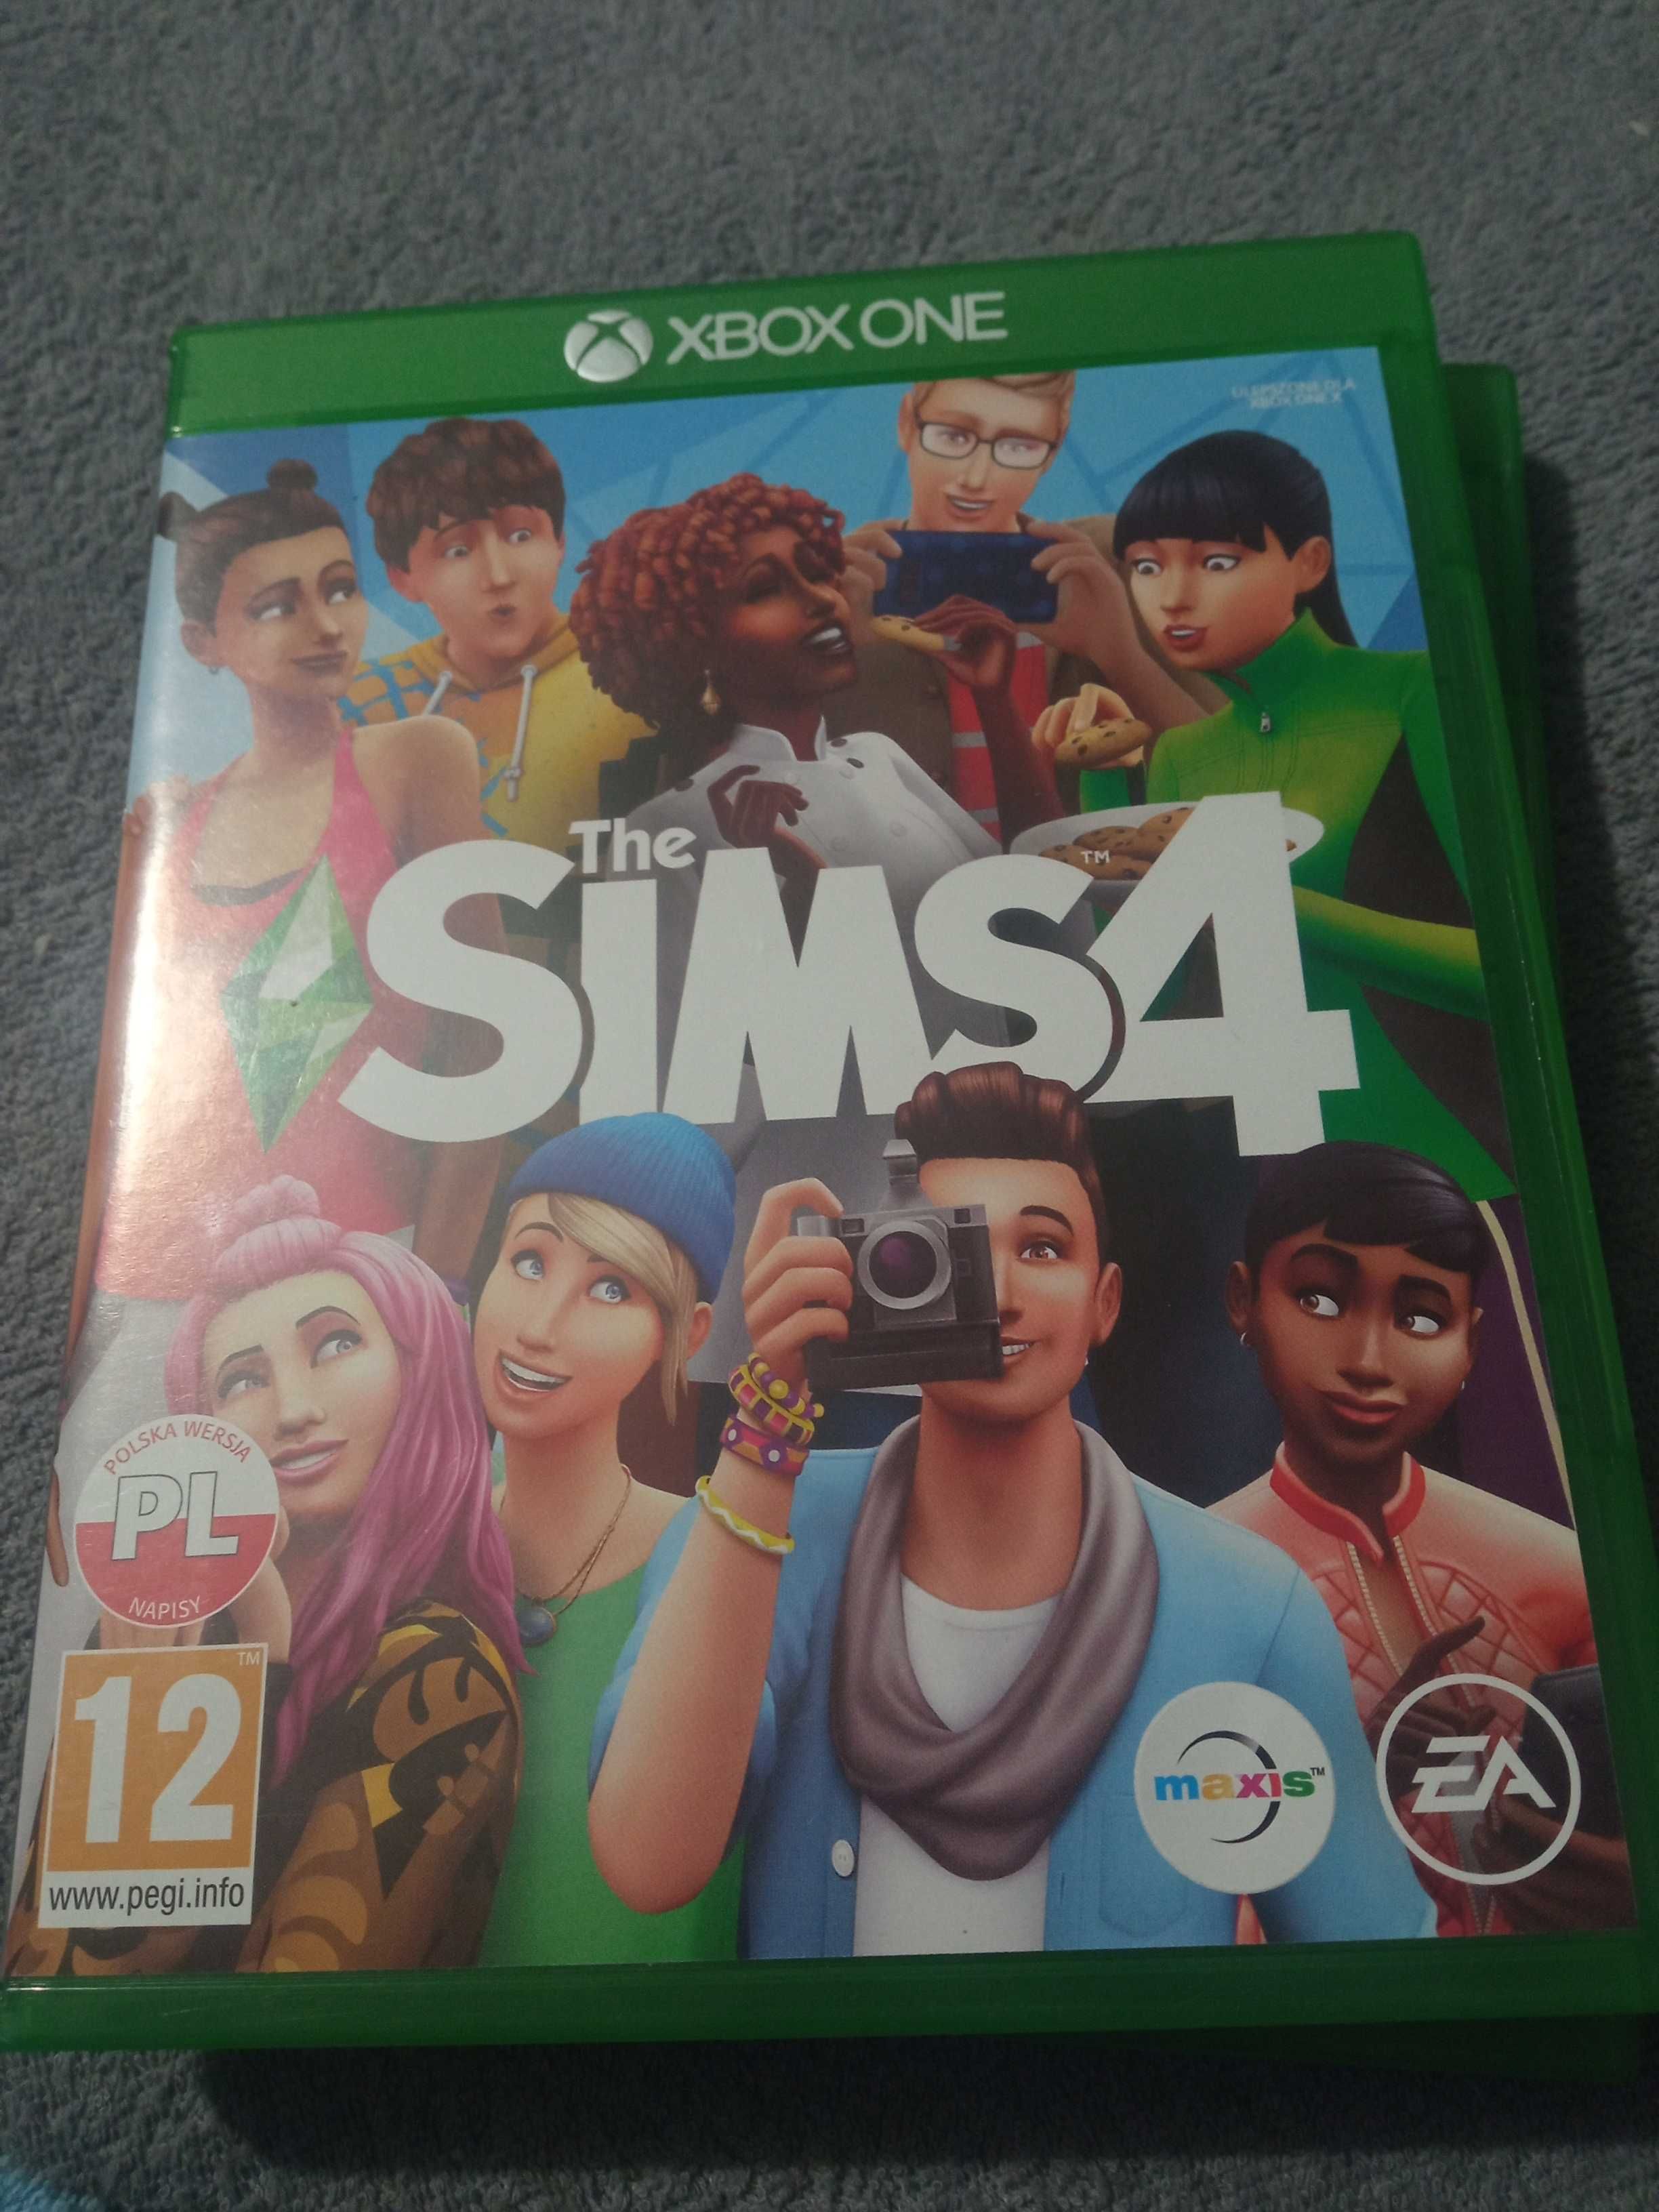 Theo Sims 4 Xbox one